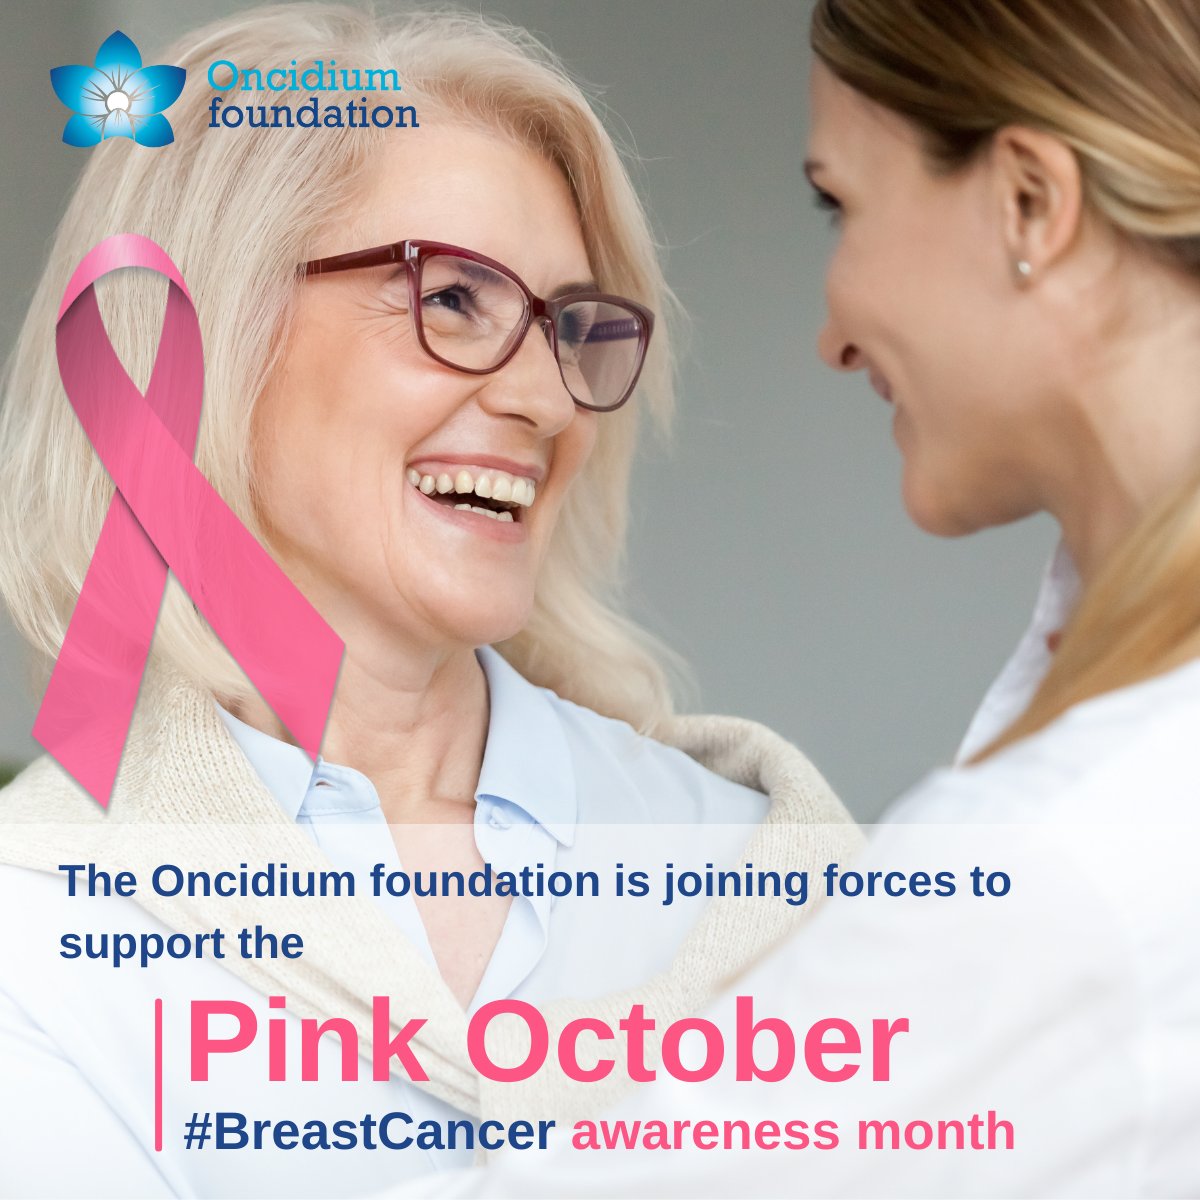 October is #BreastCancerAwarenessMonth, the annual campaign to raise awareness about the impact of #breastcancer. Let’s join our forces to increase attention and support for #Awareness, #earlydetection and #treatmentaccess as well as palliative care.
#access #PinkOctober